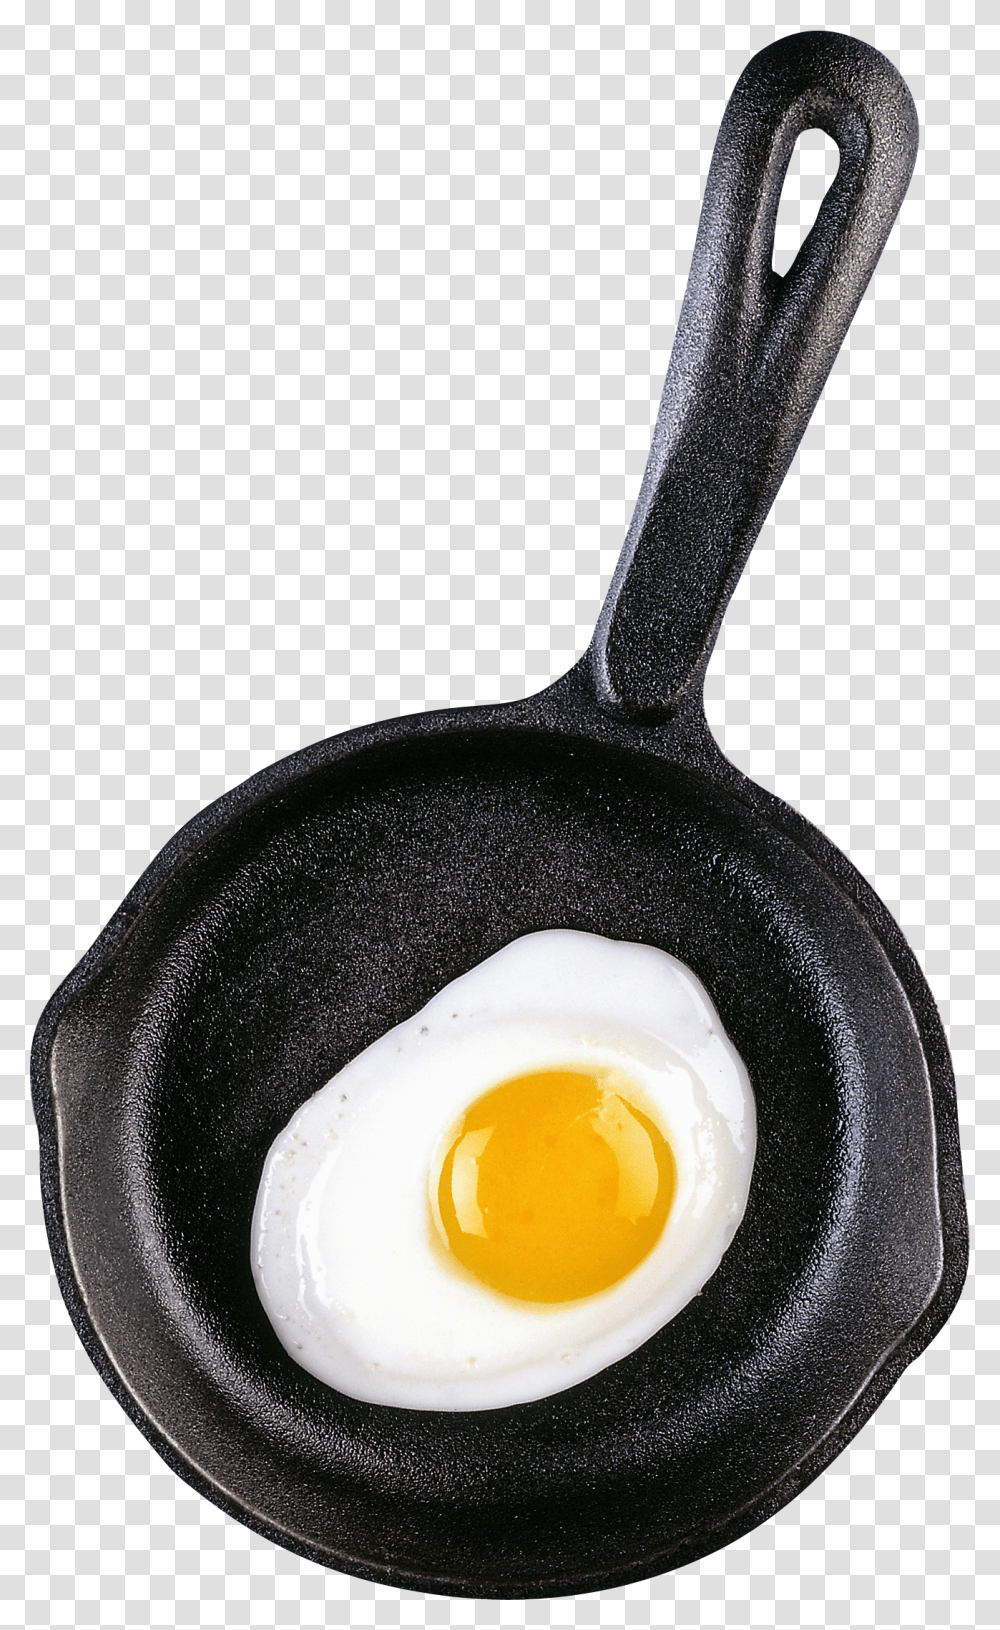 Frying Pan Image Fried Egg In A Pan Clipart, Wok, Food, Spoon Transparent Png